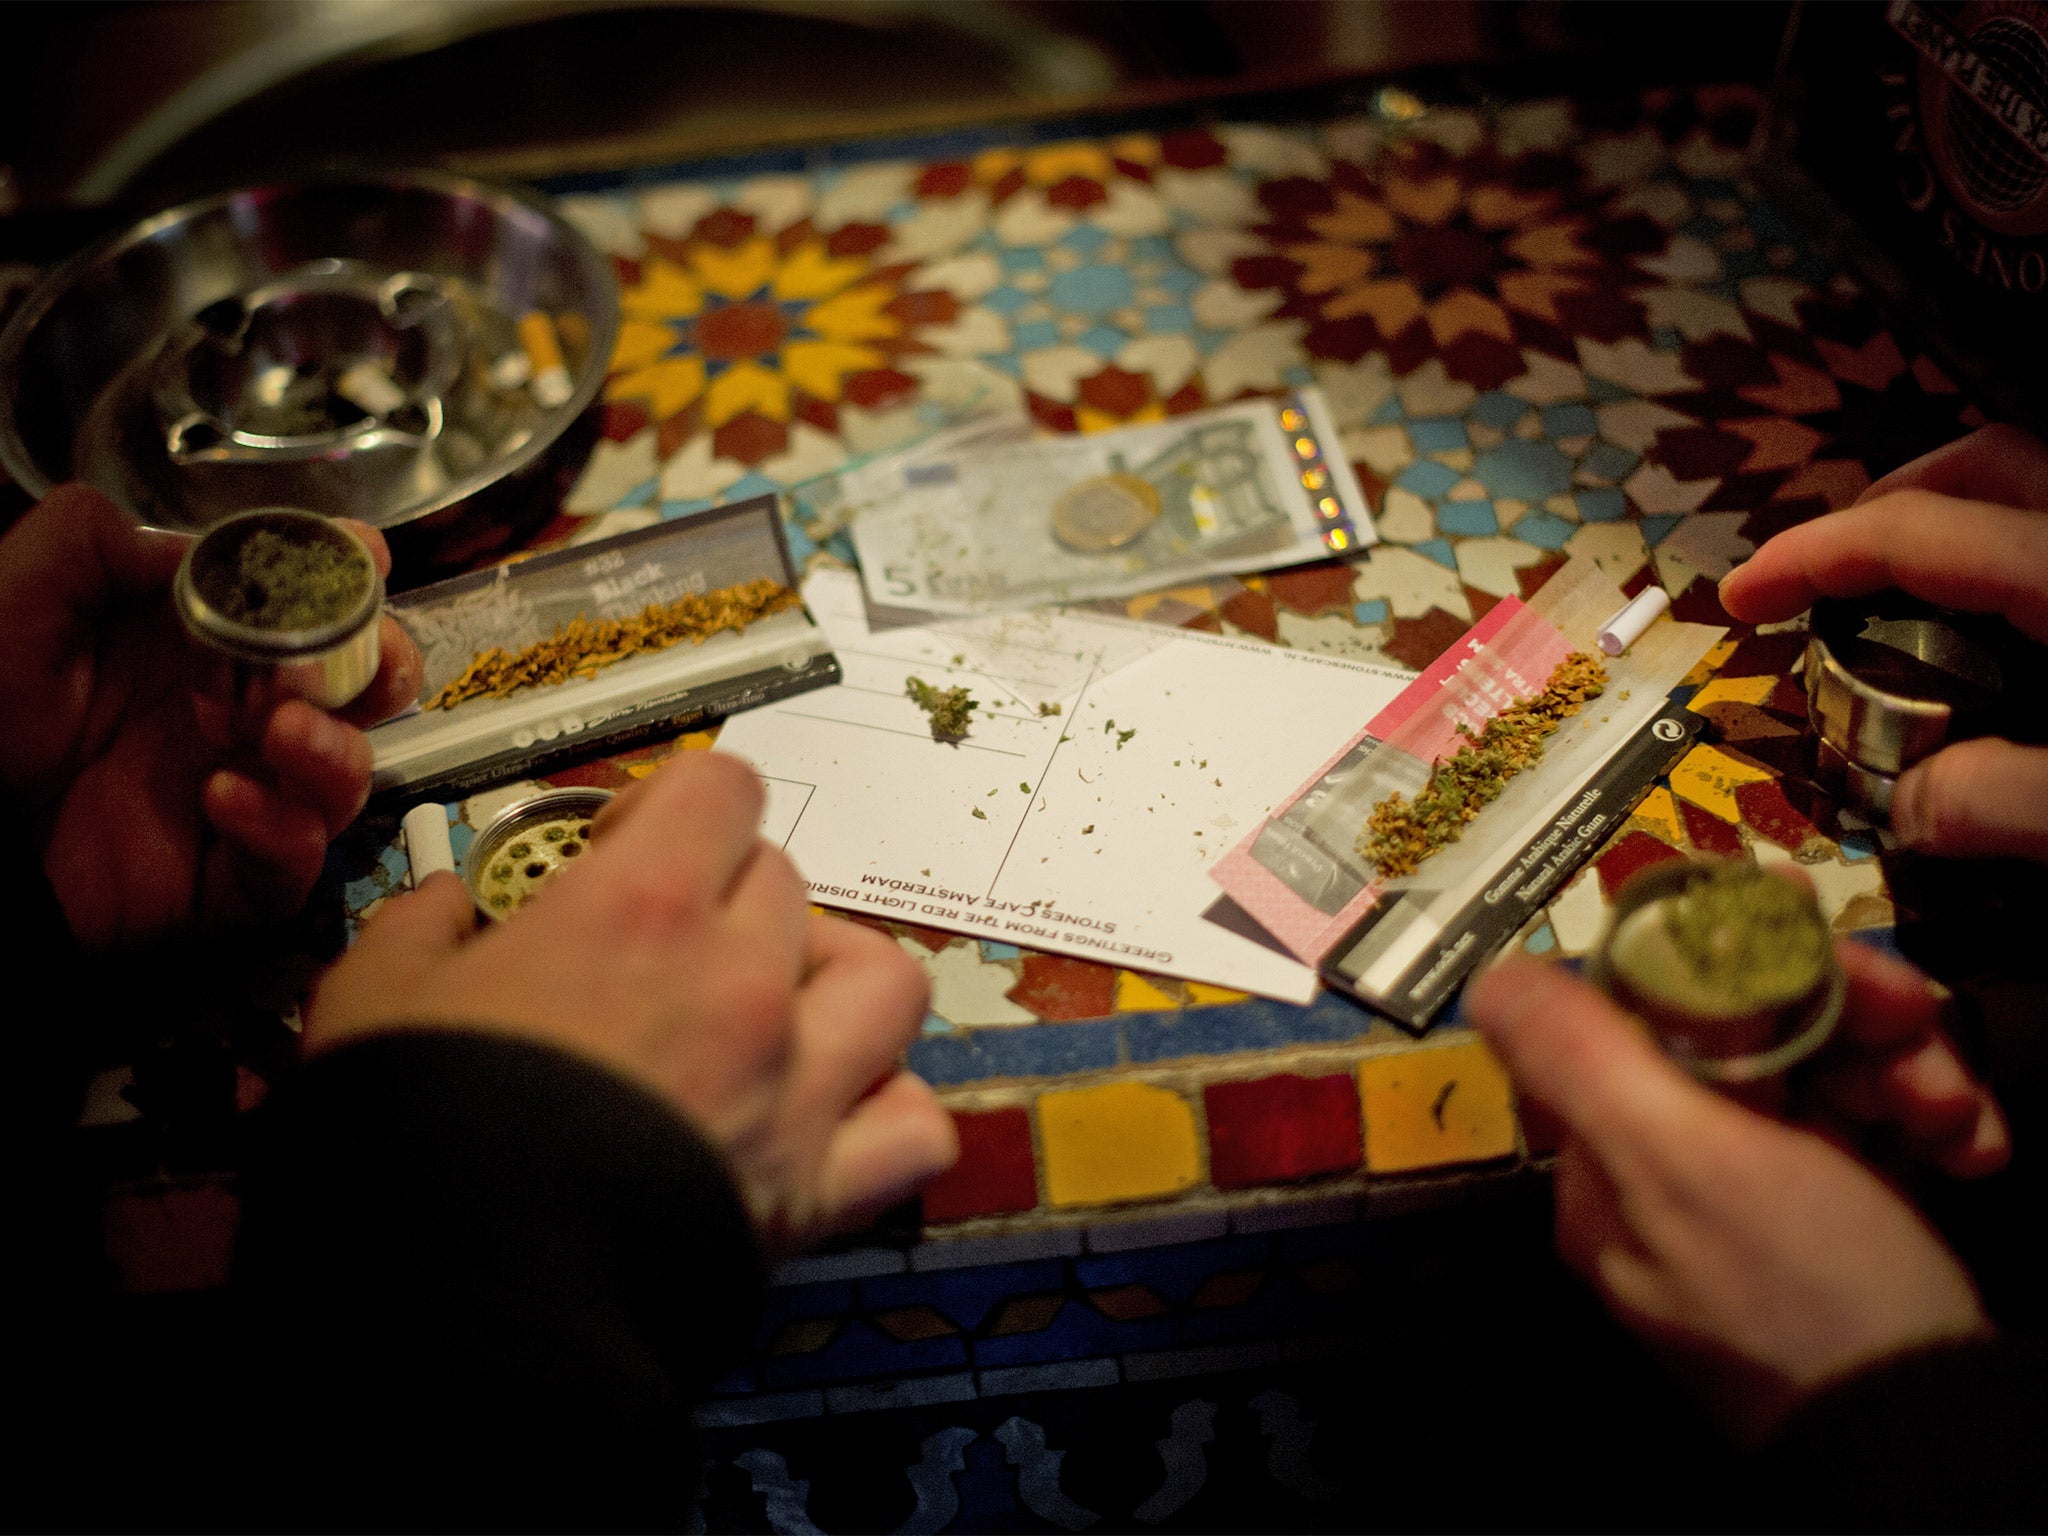 Cannabis joints can be rolled freely in Amsterdam cafés. Could this be a scene repeated in the UK one day?